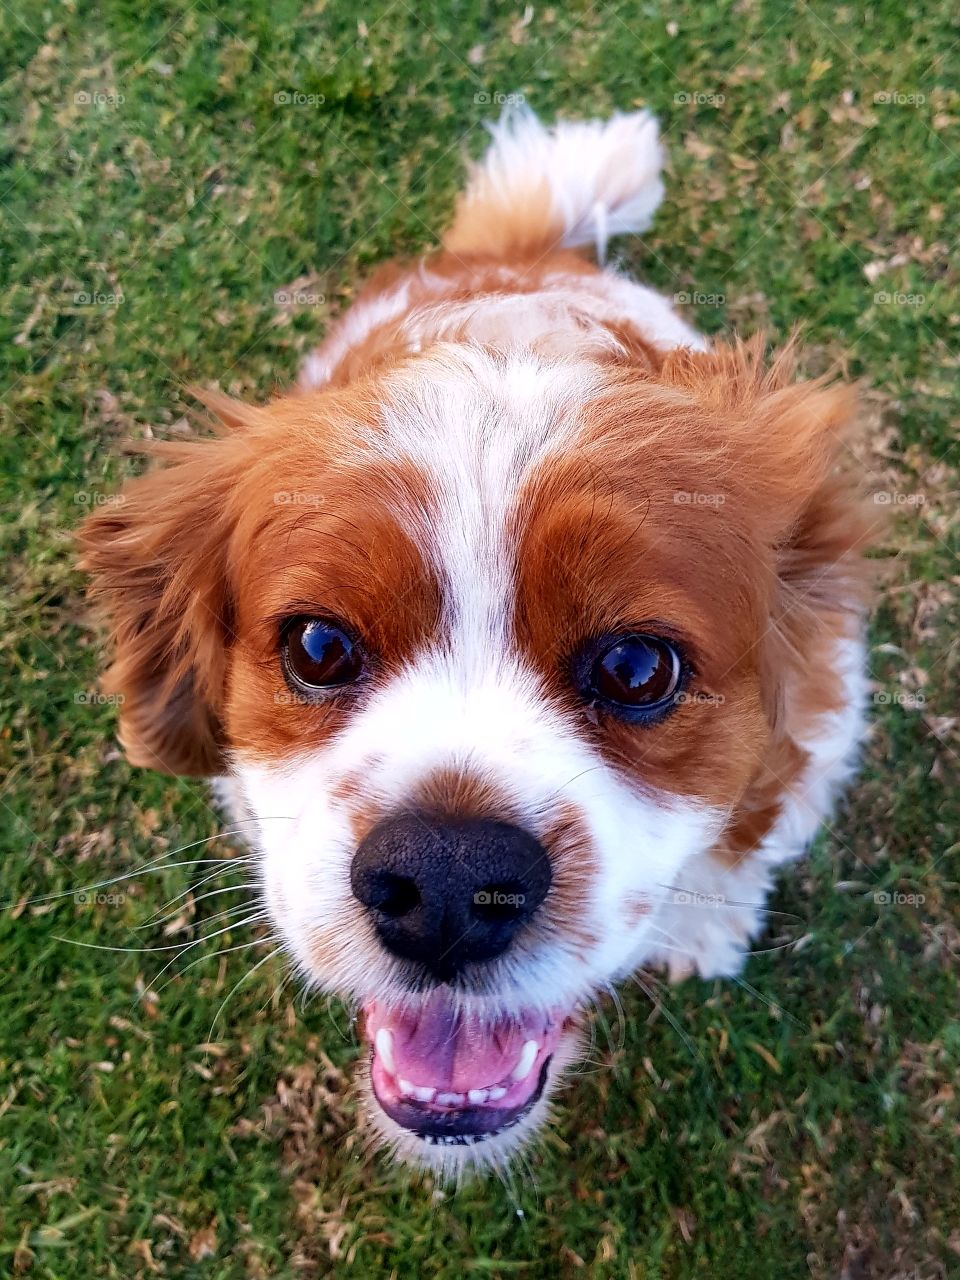 Adorable King Charles Cavalier